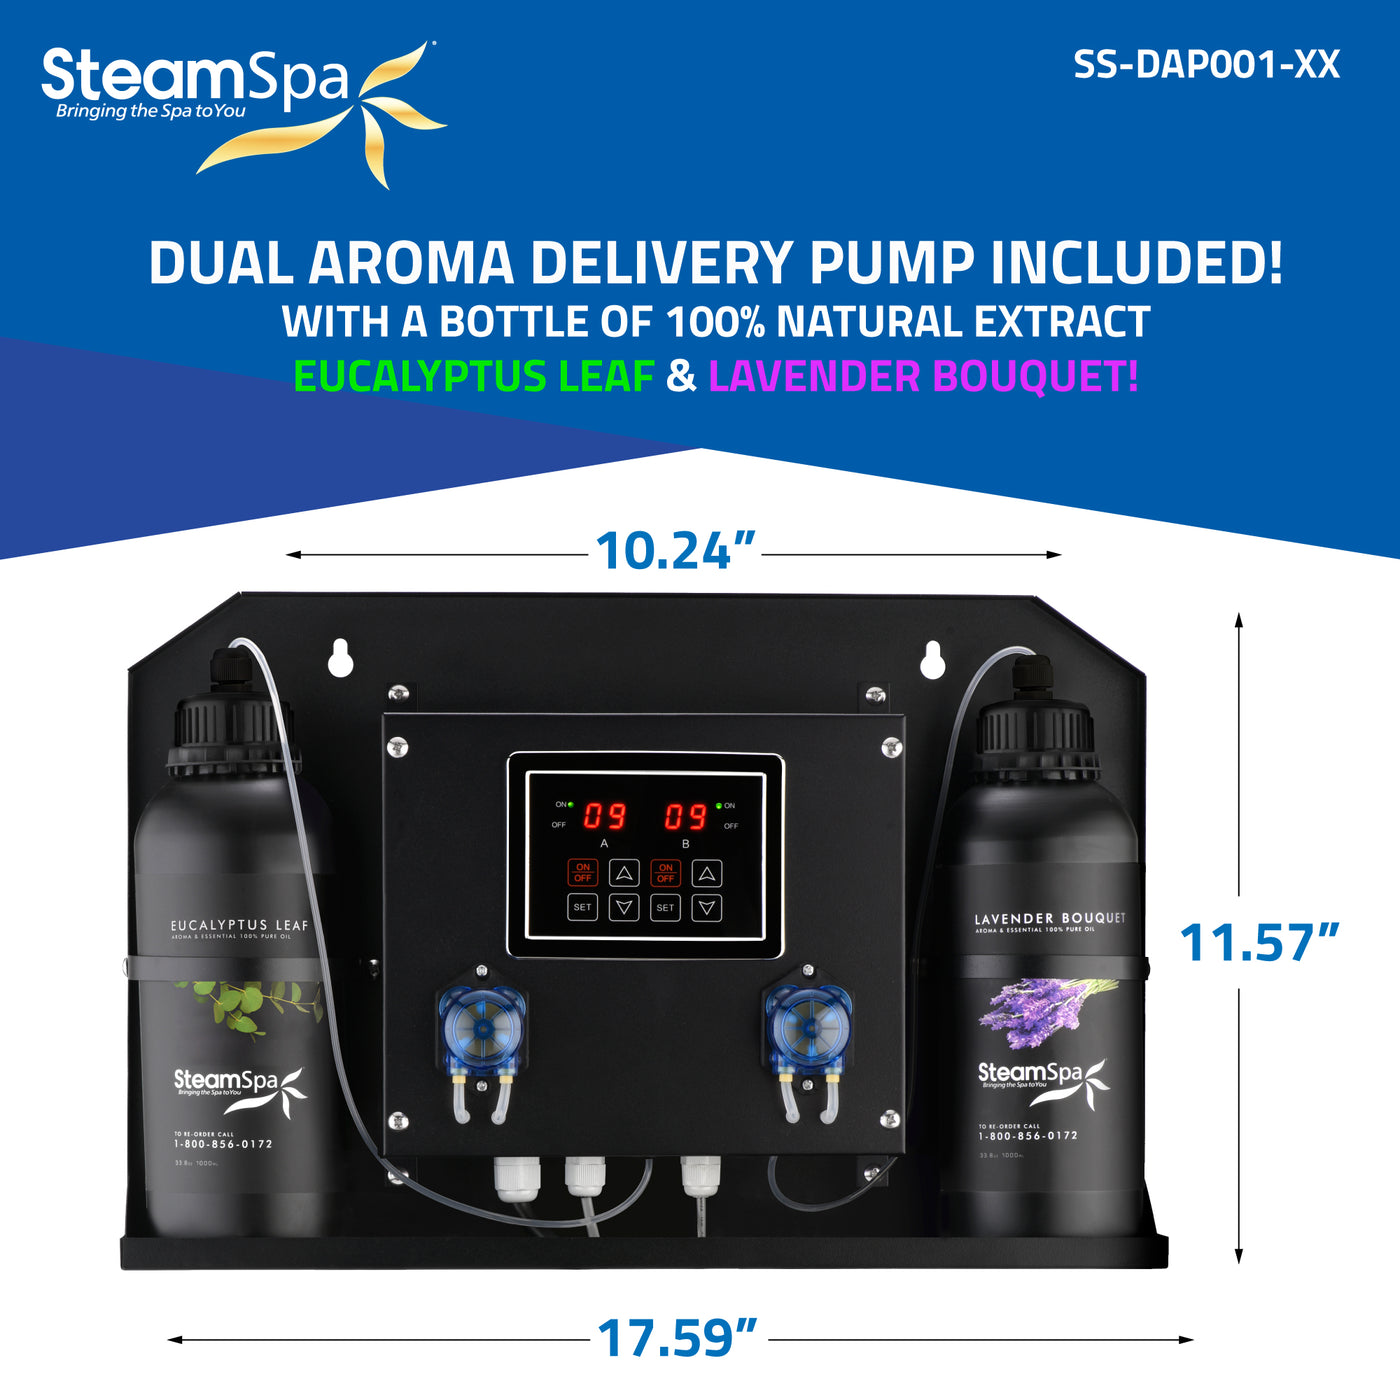 Black Series WiFi and Bluetooth 7.5kW QuickStart Steam Bath Generator Package with Dual Aroma Pump in Brushed Nickel BKT750BN-ADP